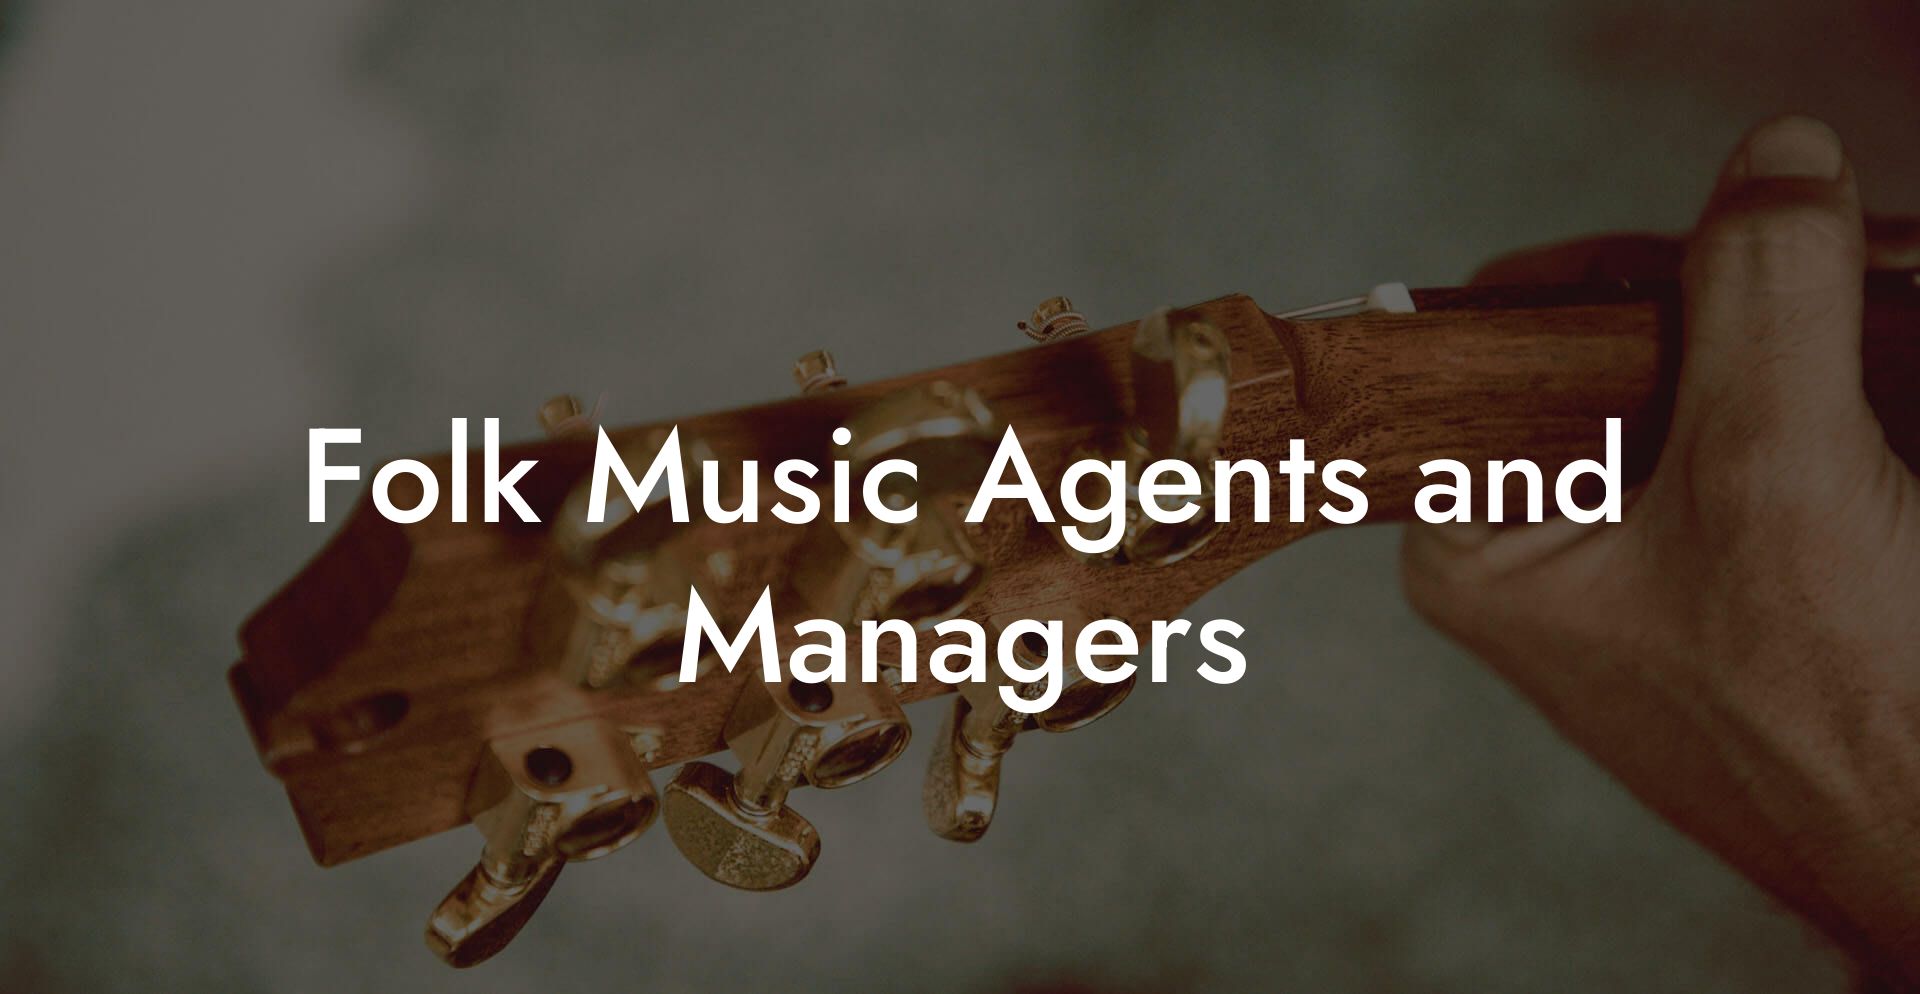 Folk Music Agents and Managers